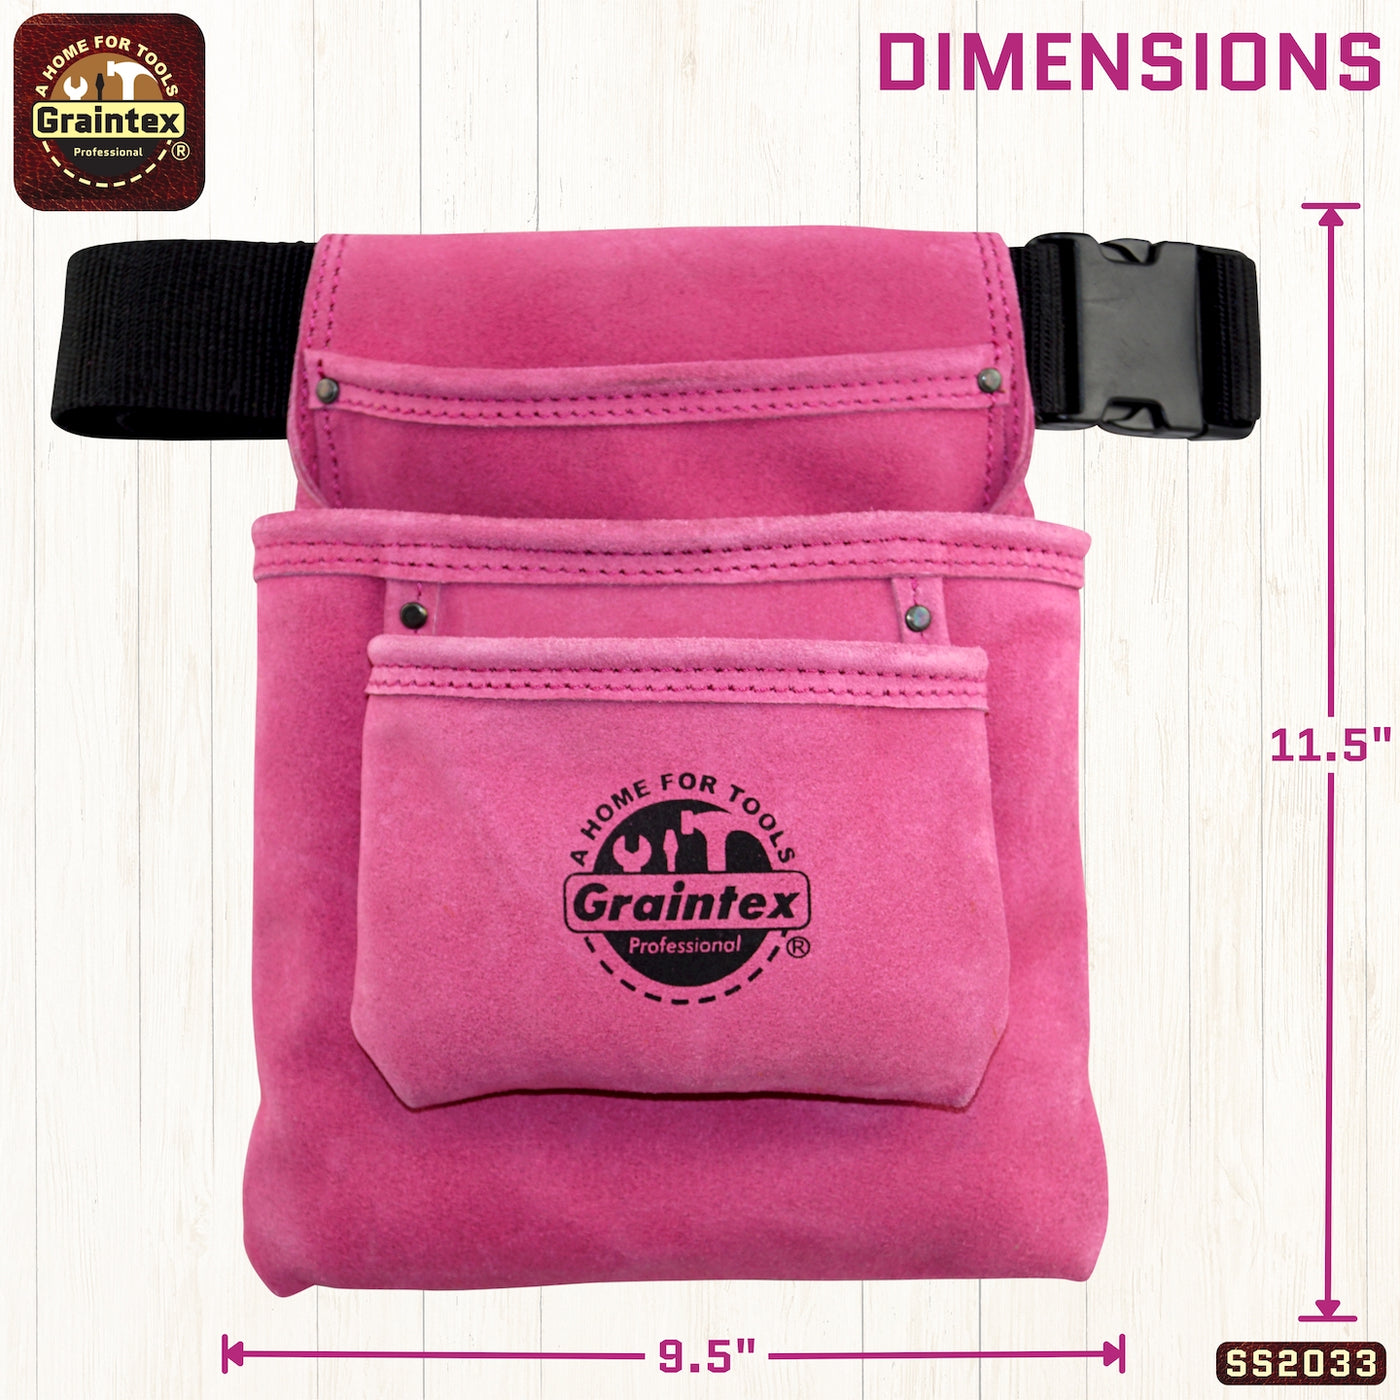 SS2033 :: 3 Pocket Nail & Tool Pouch Pink Color Suede Leather with Belt